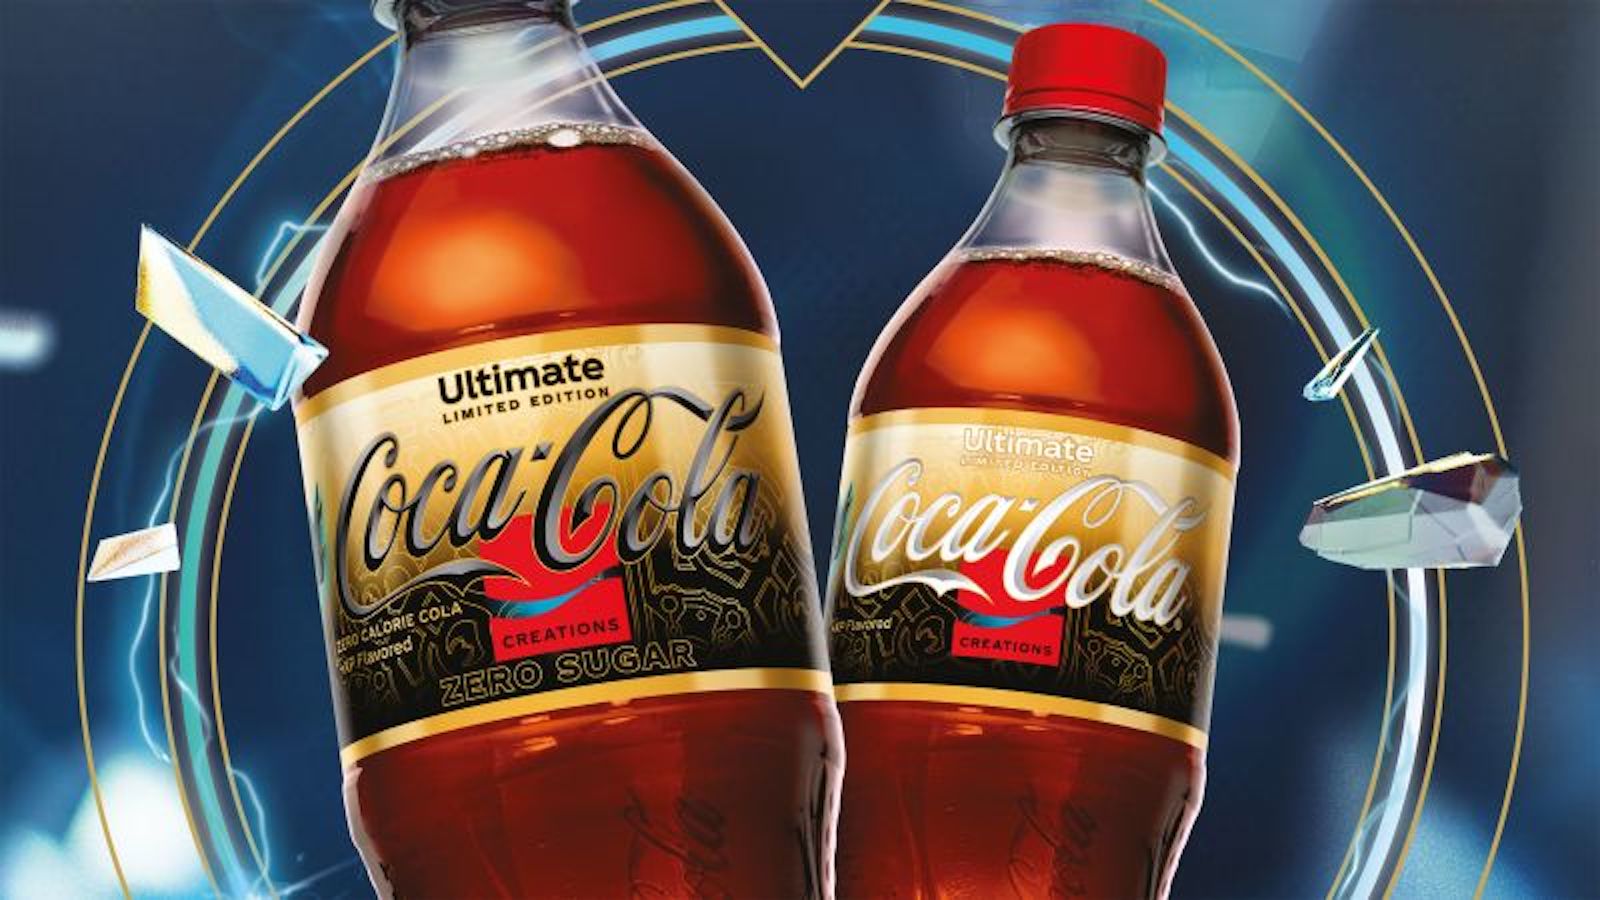 “Coca-Cola Ultimate” Flavor for Gamers